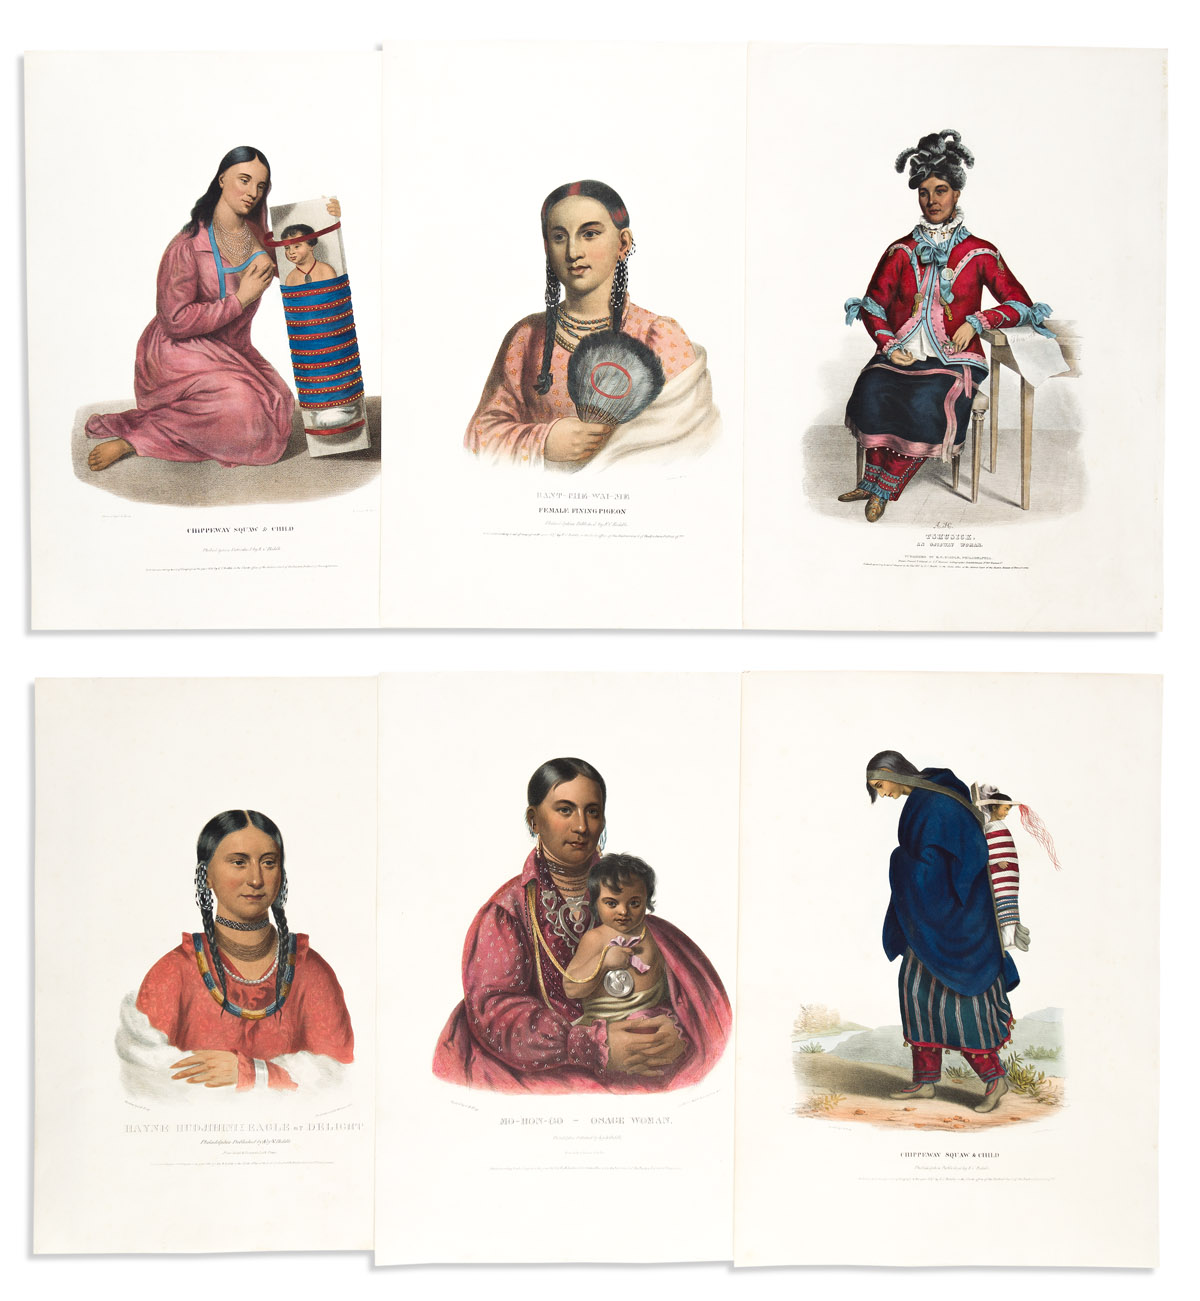 (NATIVE AMERICANS.) Thomas McKenney; and James Hall. Group of 6 hand-colored lithographed plates of women and children